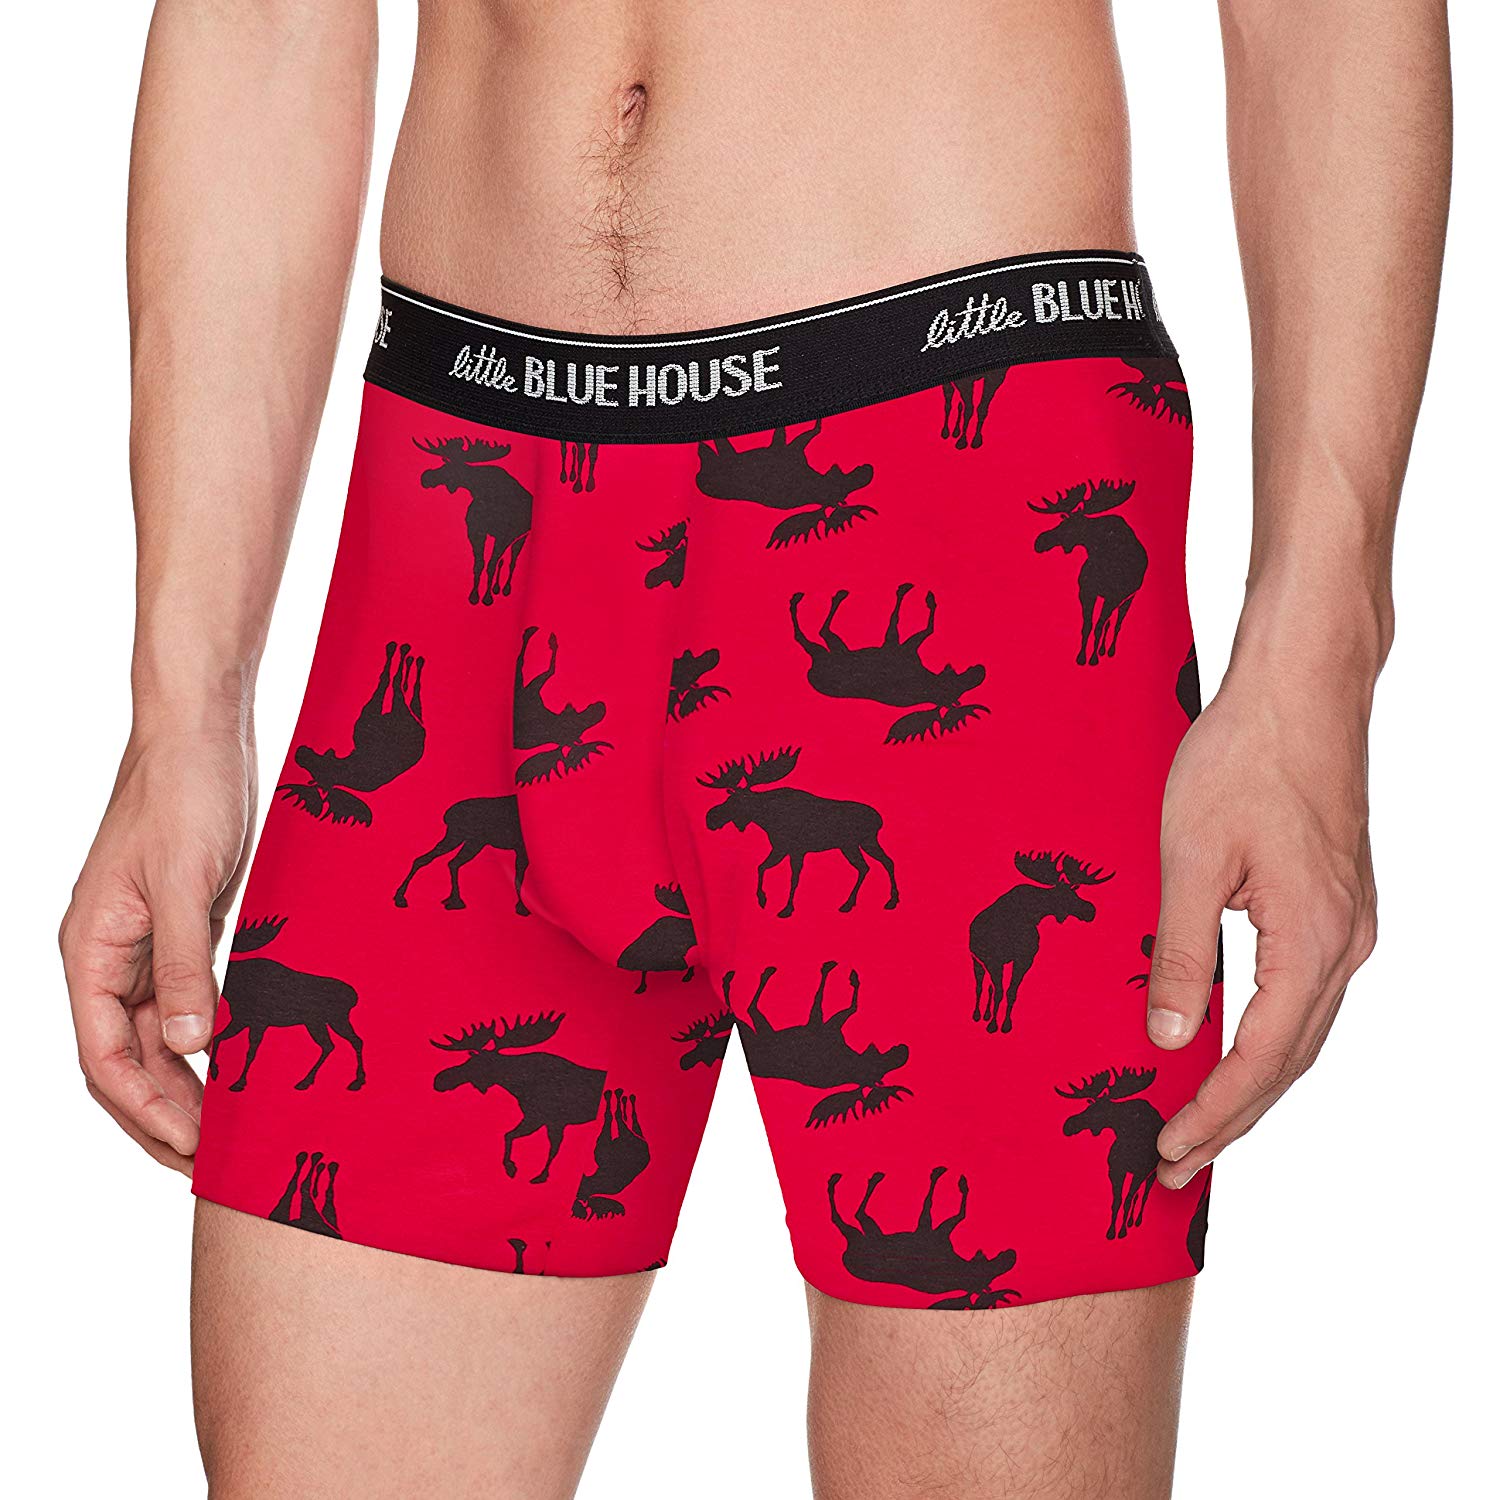 Canadian Men's Printed Boxers - From Canada Eh